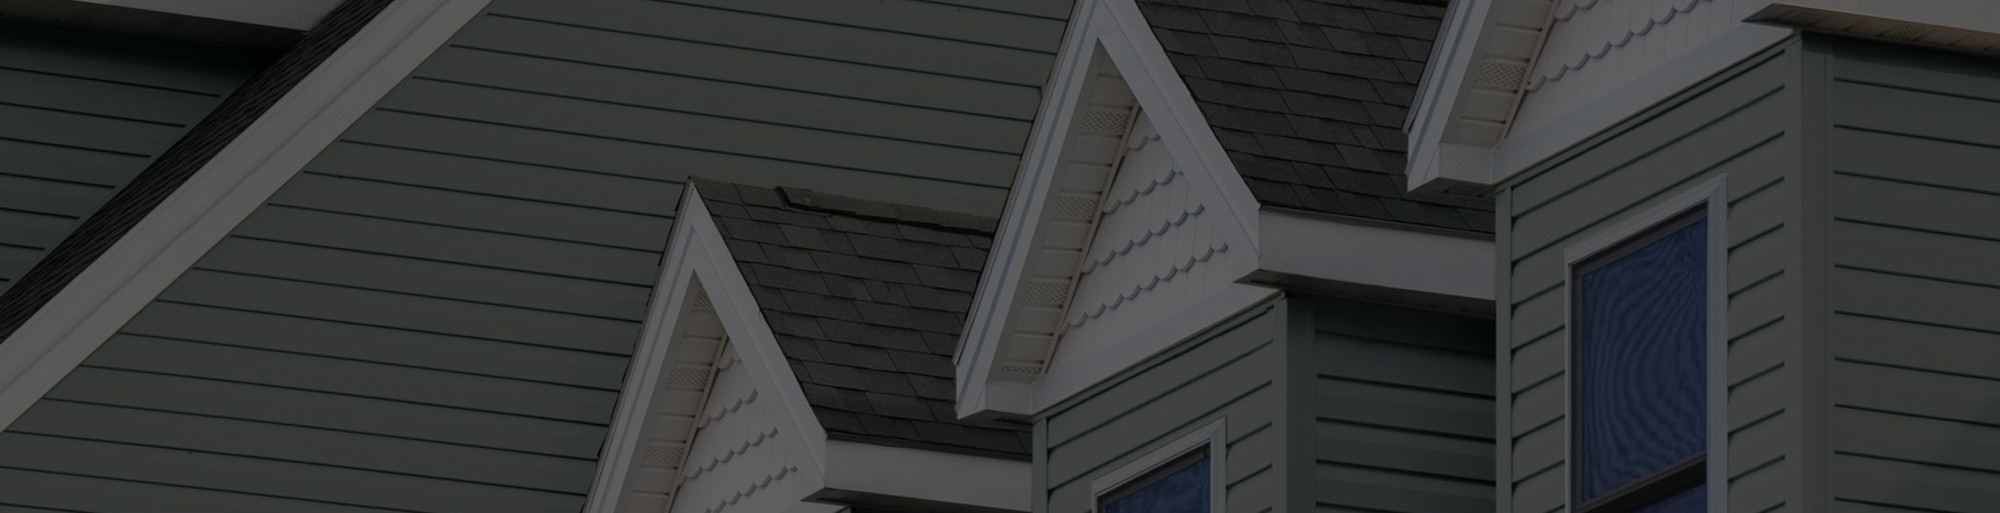 Brookfield, WI siding repair and installation company